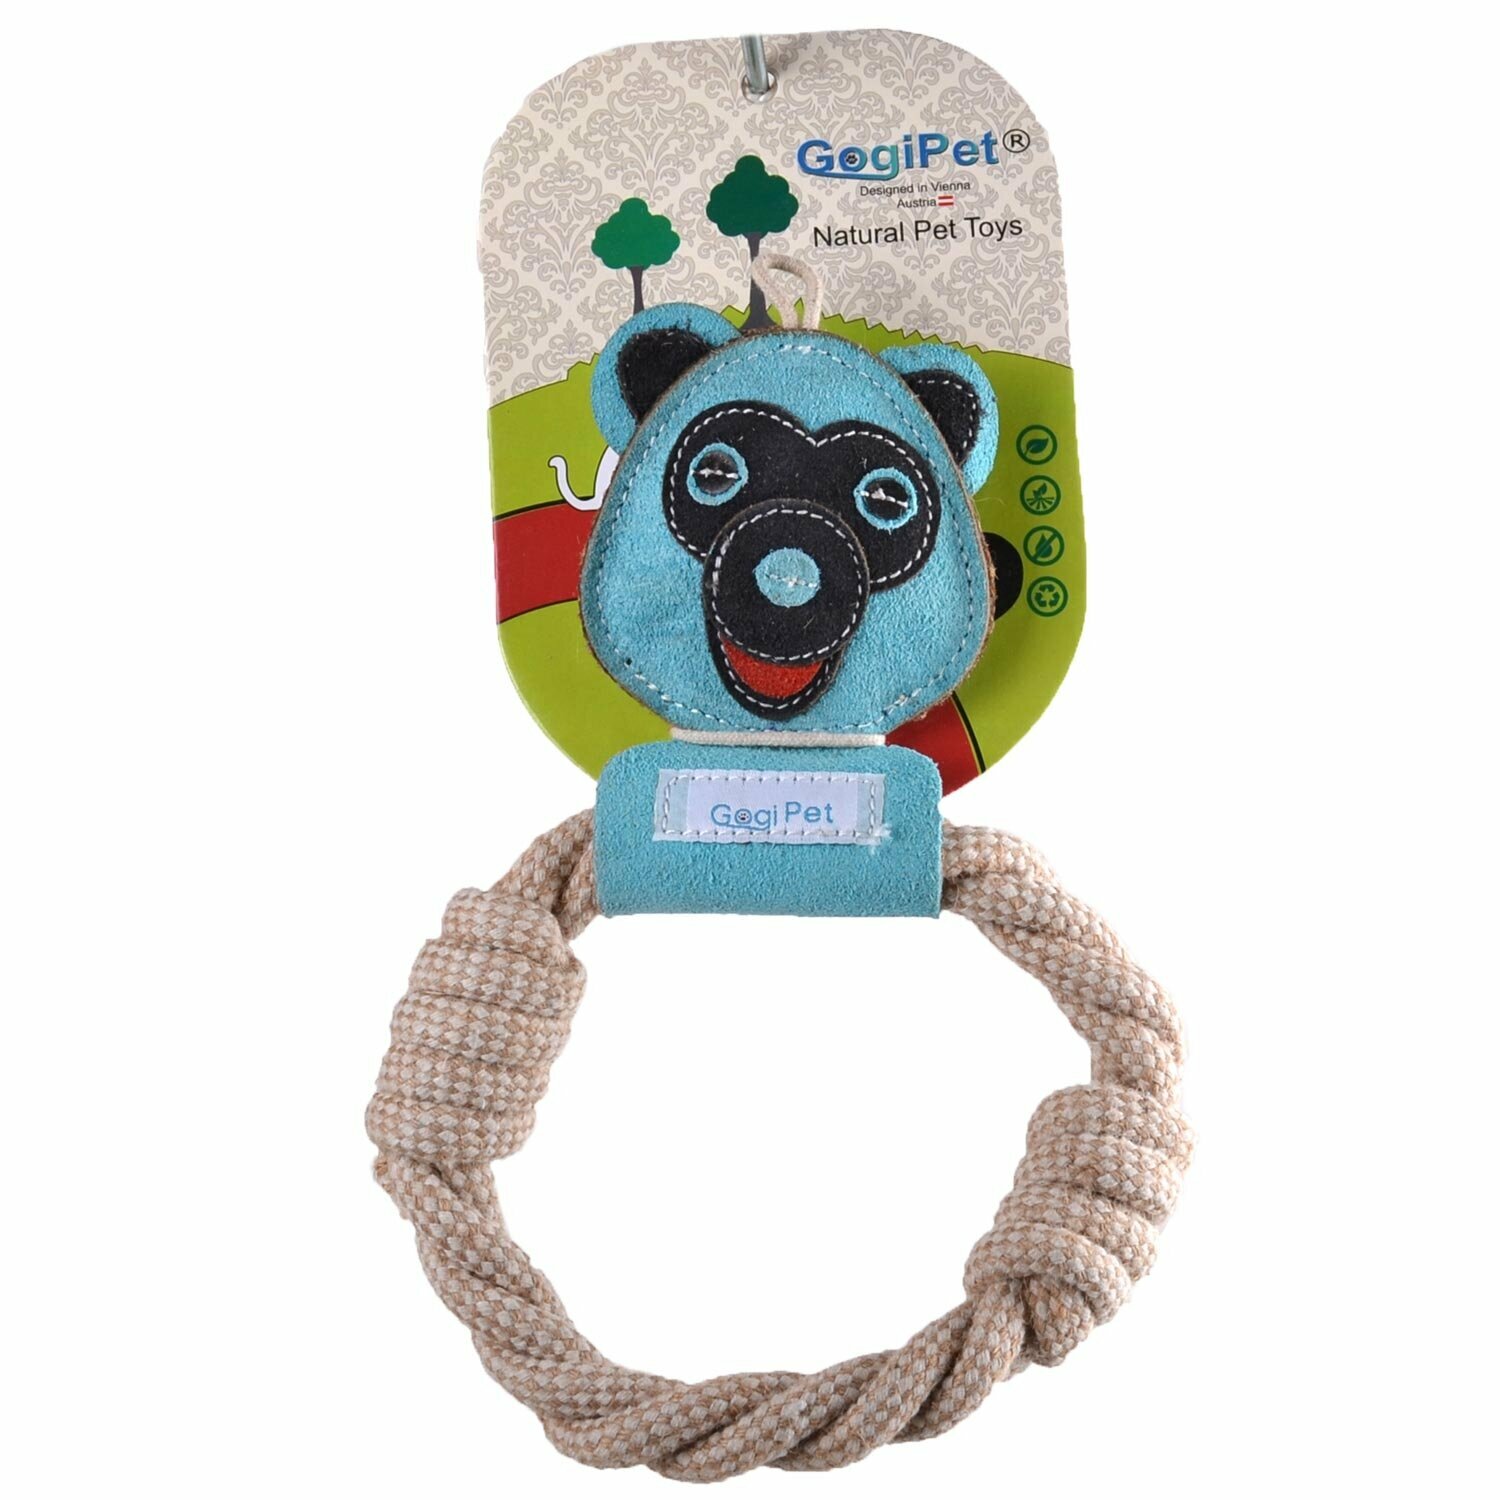 Toys for dogs - GogiPet ® Bears made from natural and sustainable raw materials